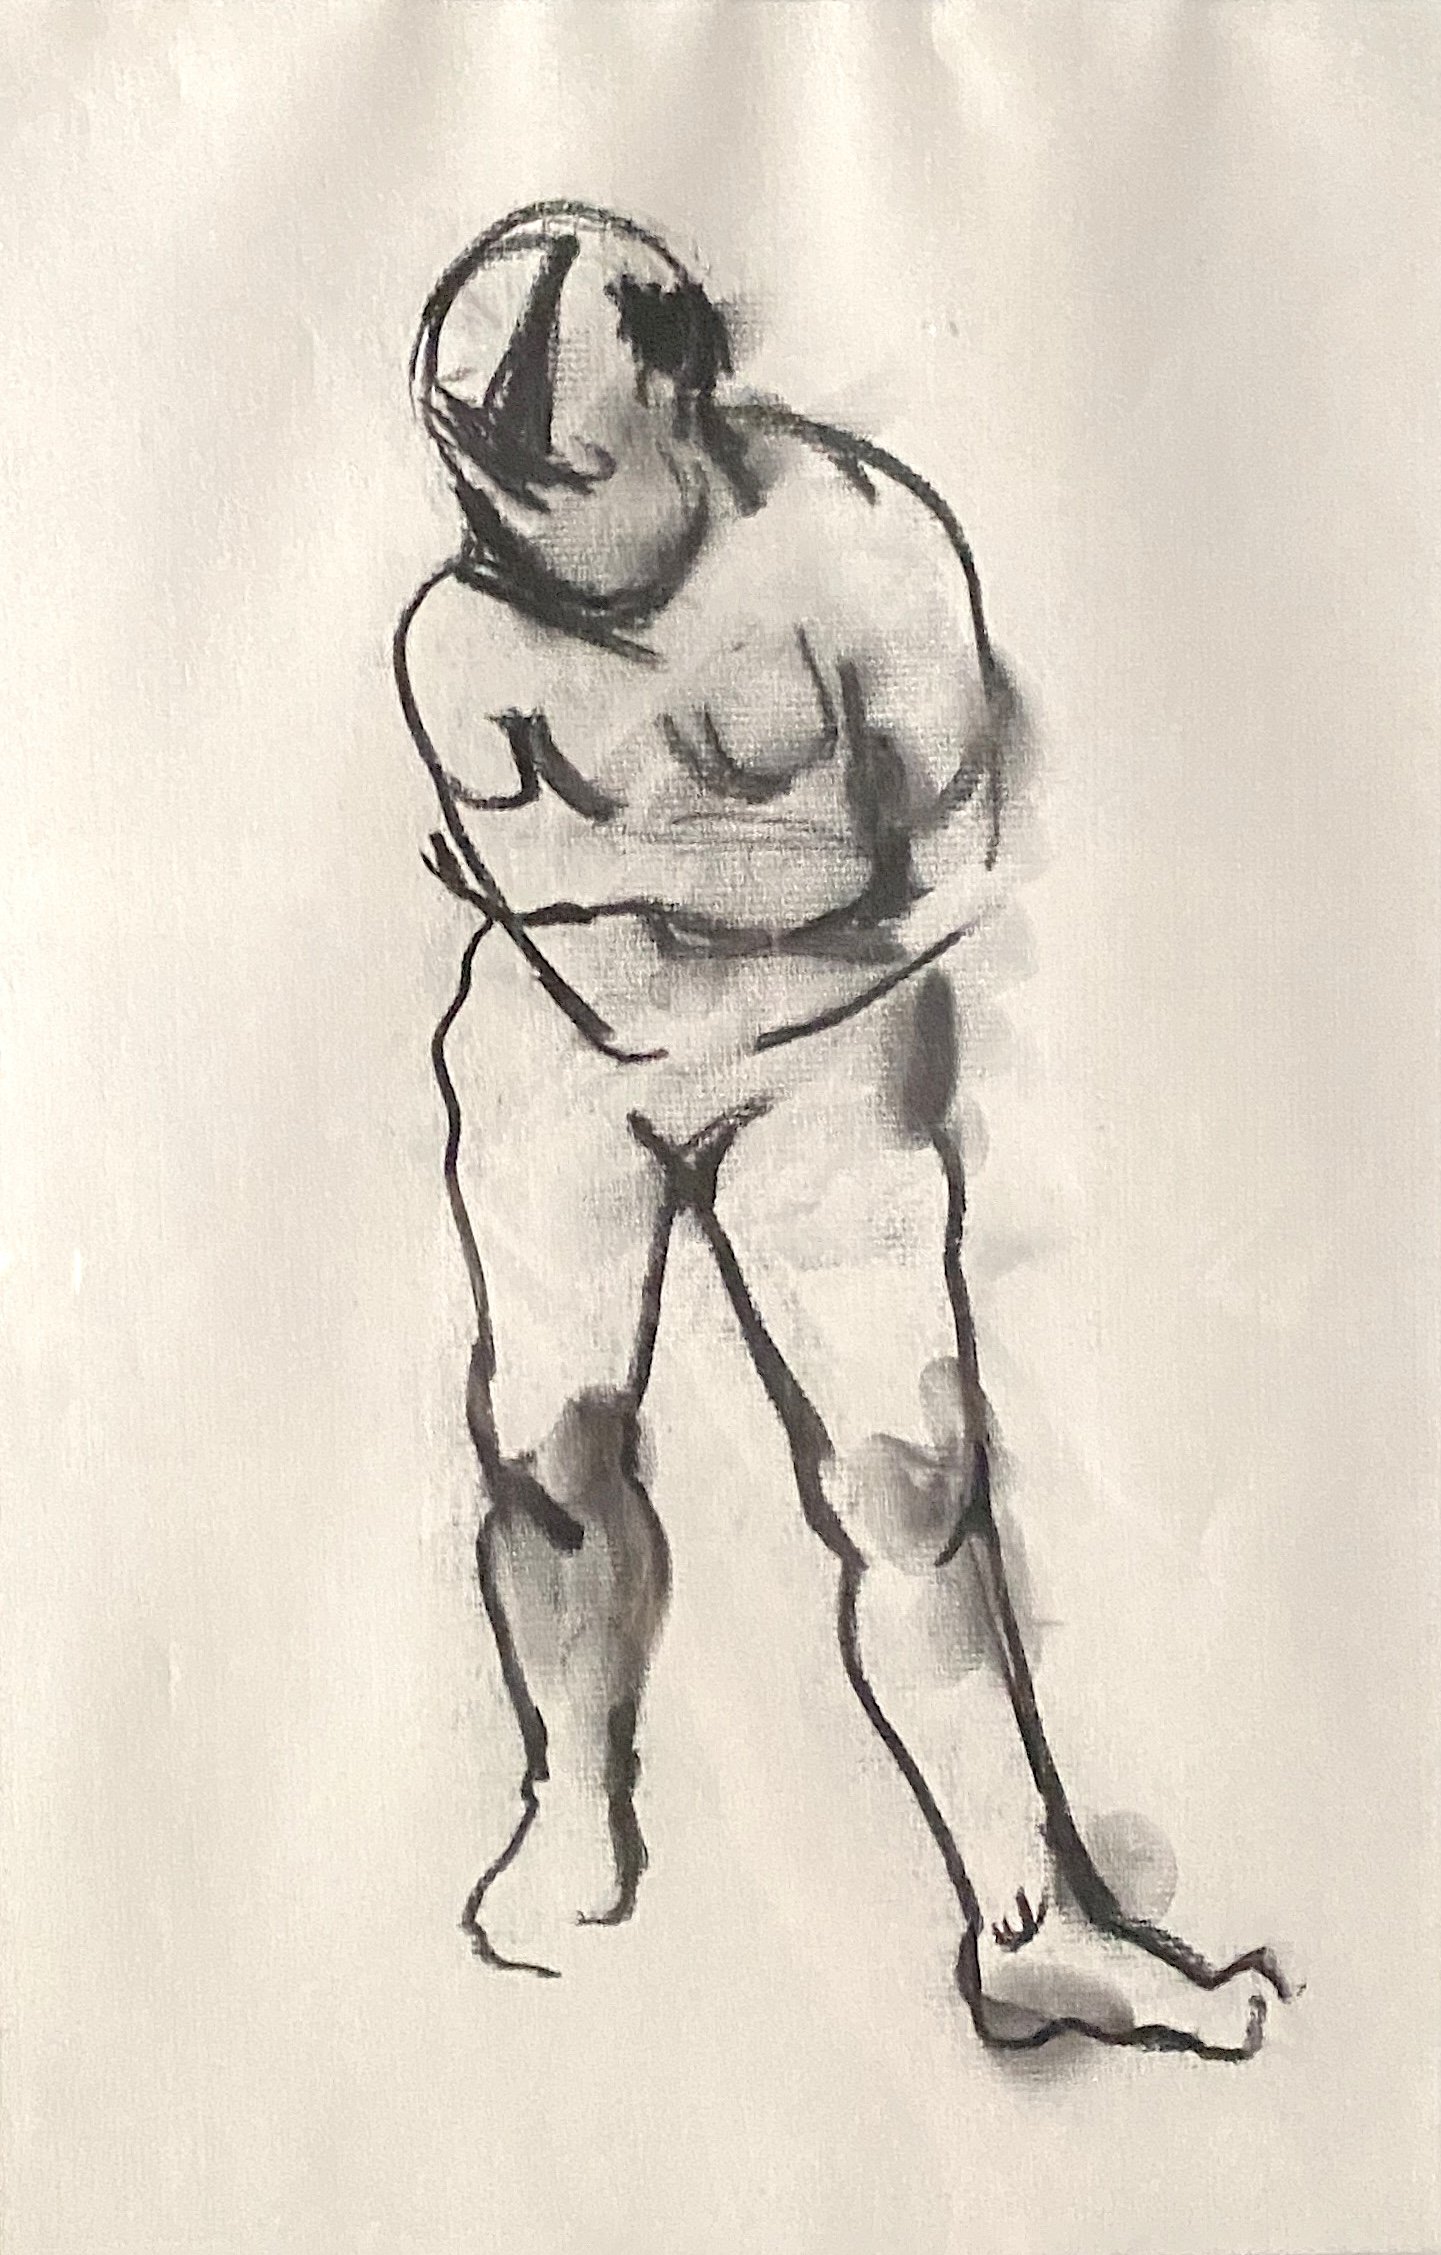 Standing Figure on Woven Fabric, Charcoal, 15.5x10.5 in. [Framed]